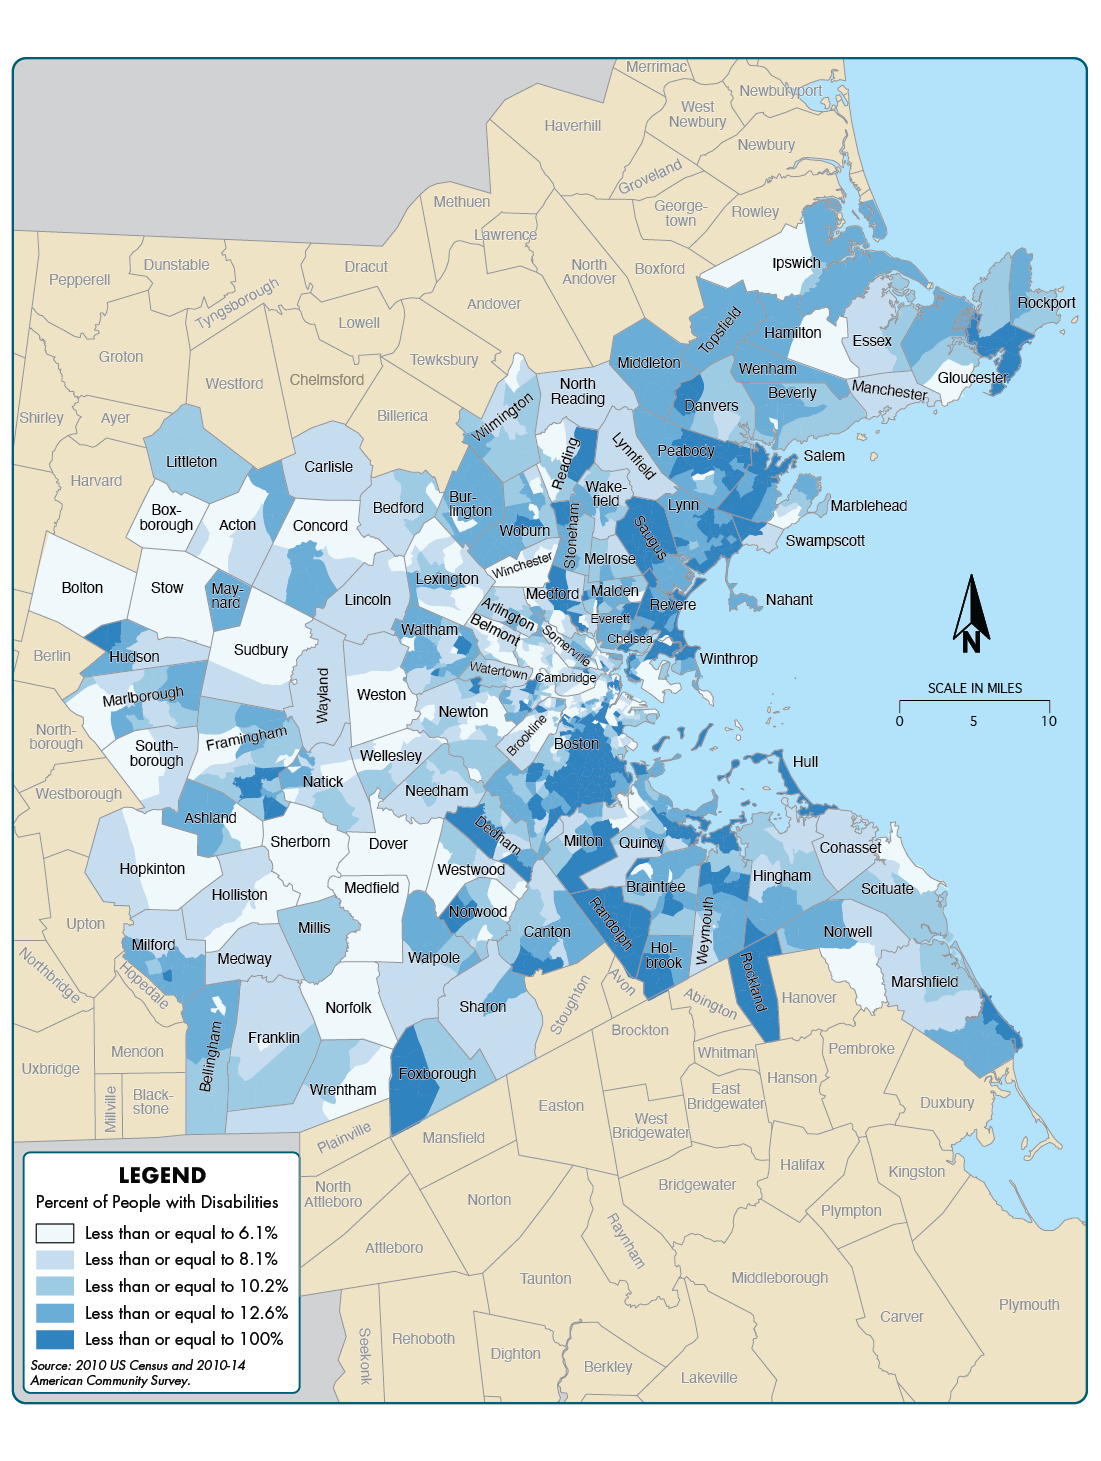 Figure 6-6 is a map showing the percent of the population with disabilities across the 97 communities in the Boston region.